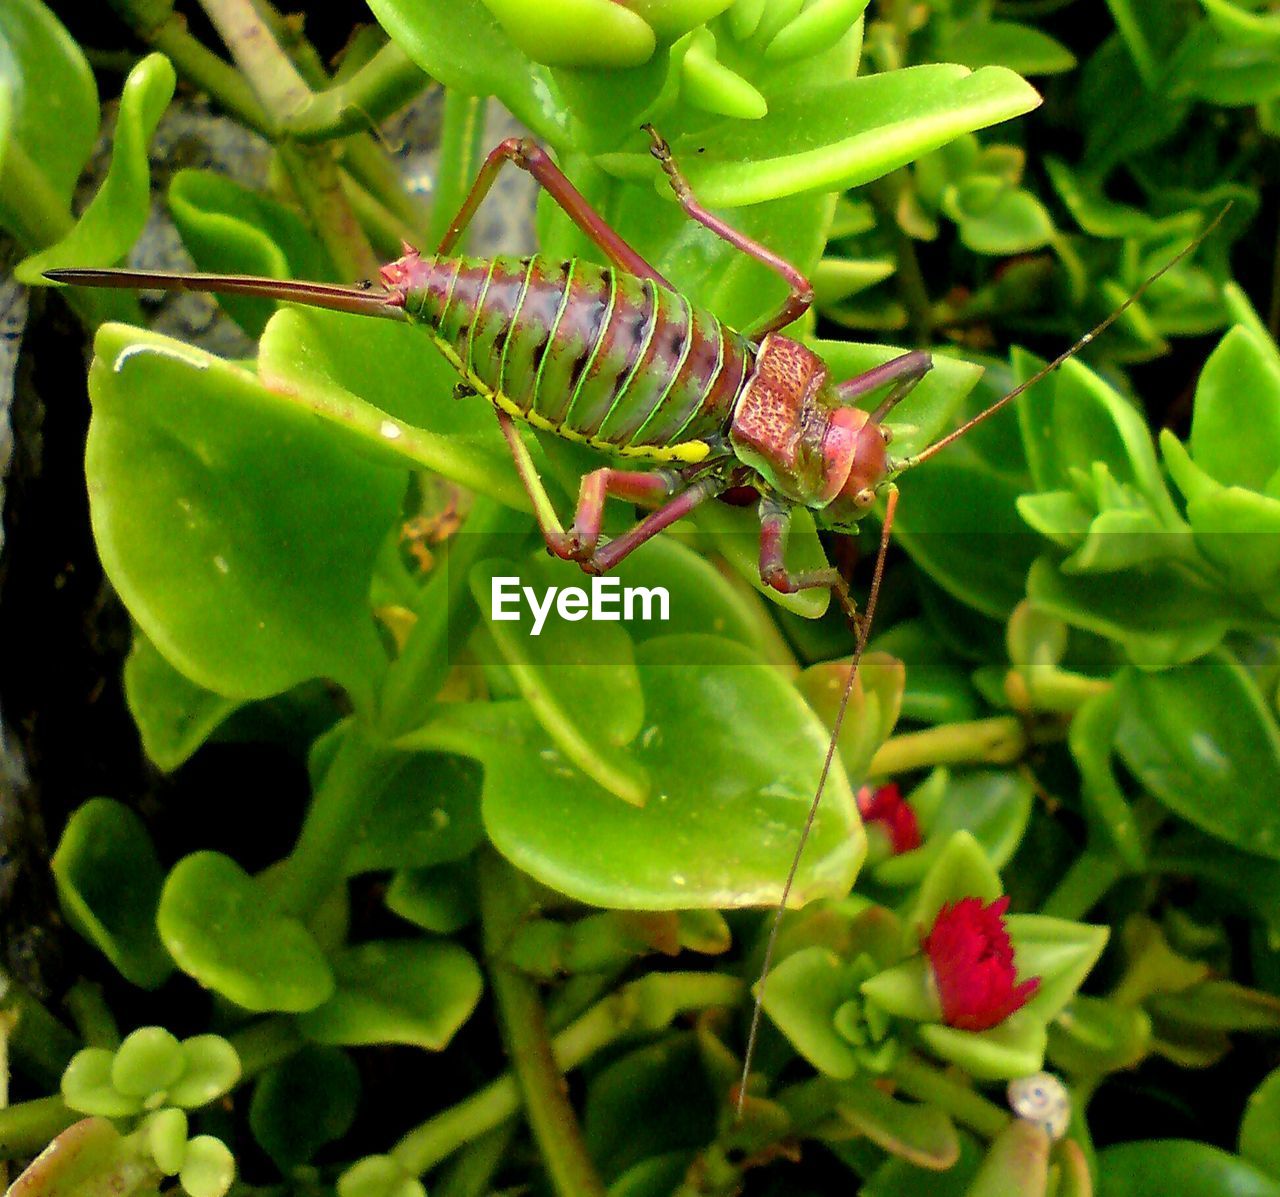 CLOSE-UP OF INSECTS ON PLANT